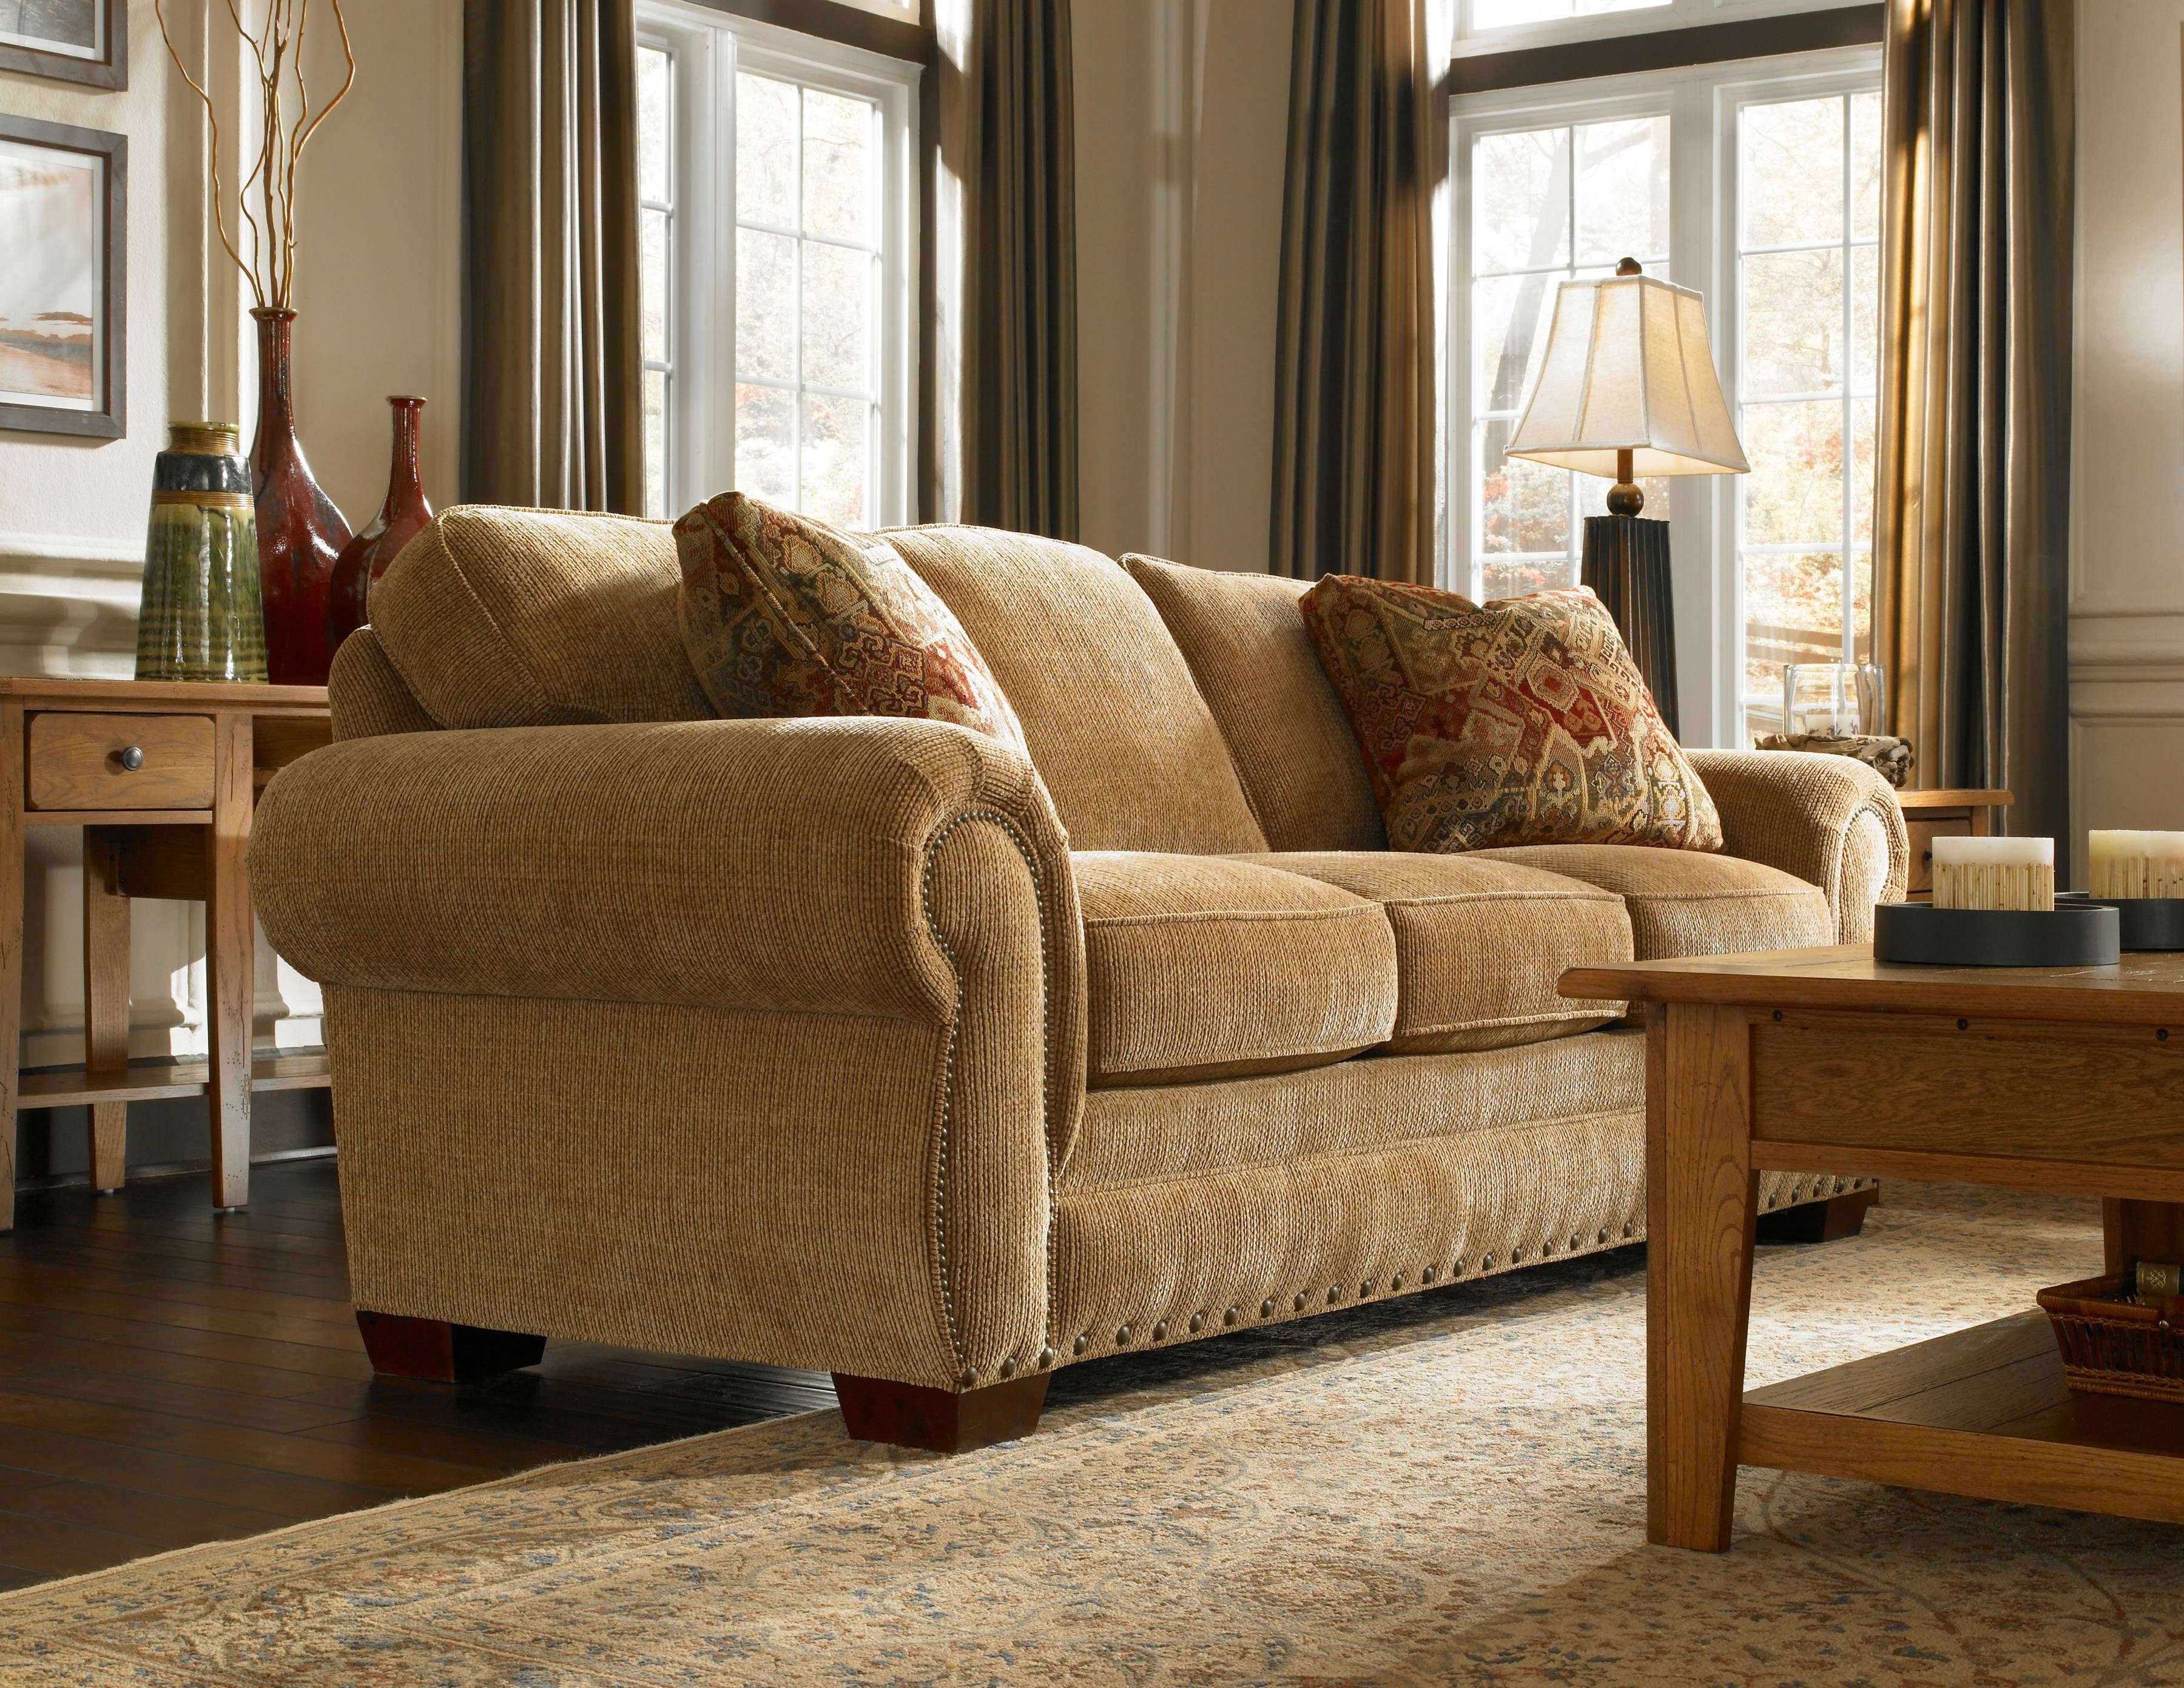 Furniture: Stunning Broyhill Sofas For Enchanting Living Room In Broyhill Sofas (View 8 of 15)